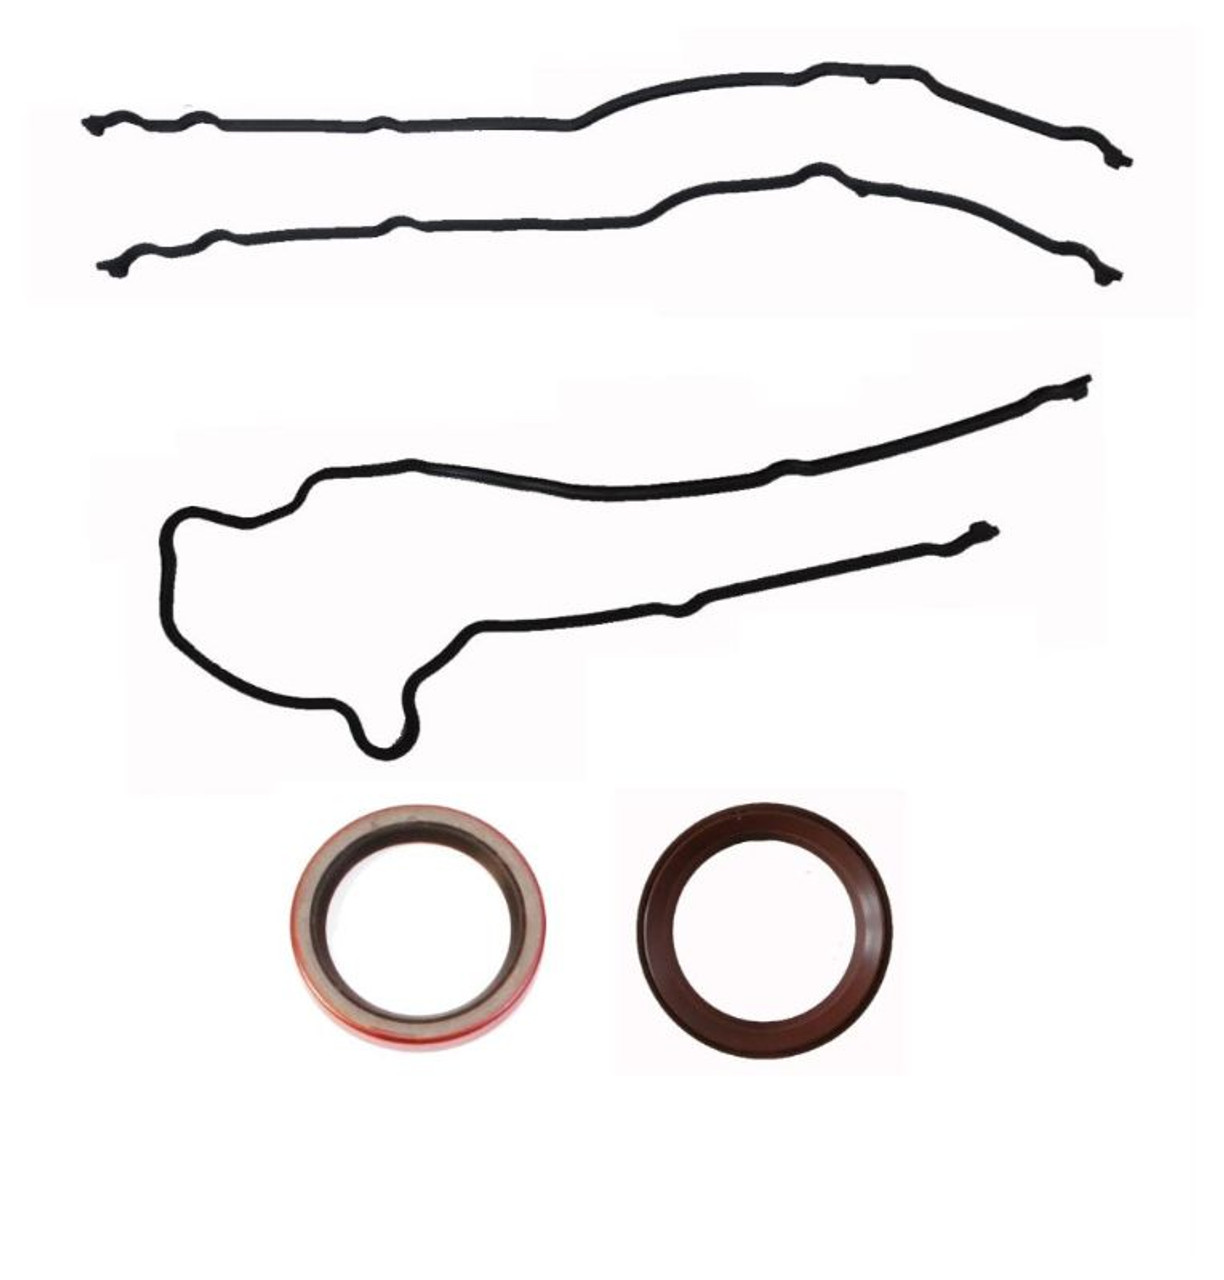 2001 Ford E-350 Super Duty 6.8L Engine Timing Cover Gasket Set TCF330-A -104